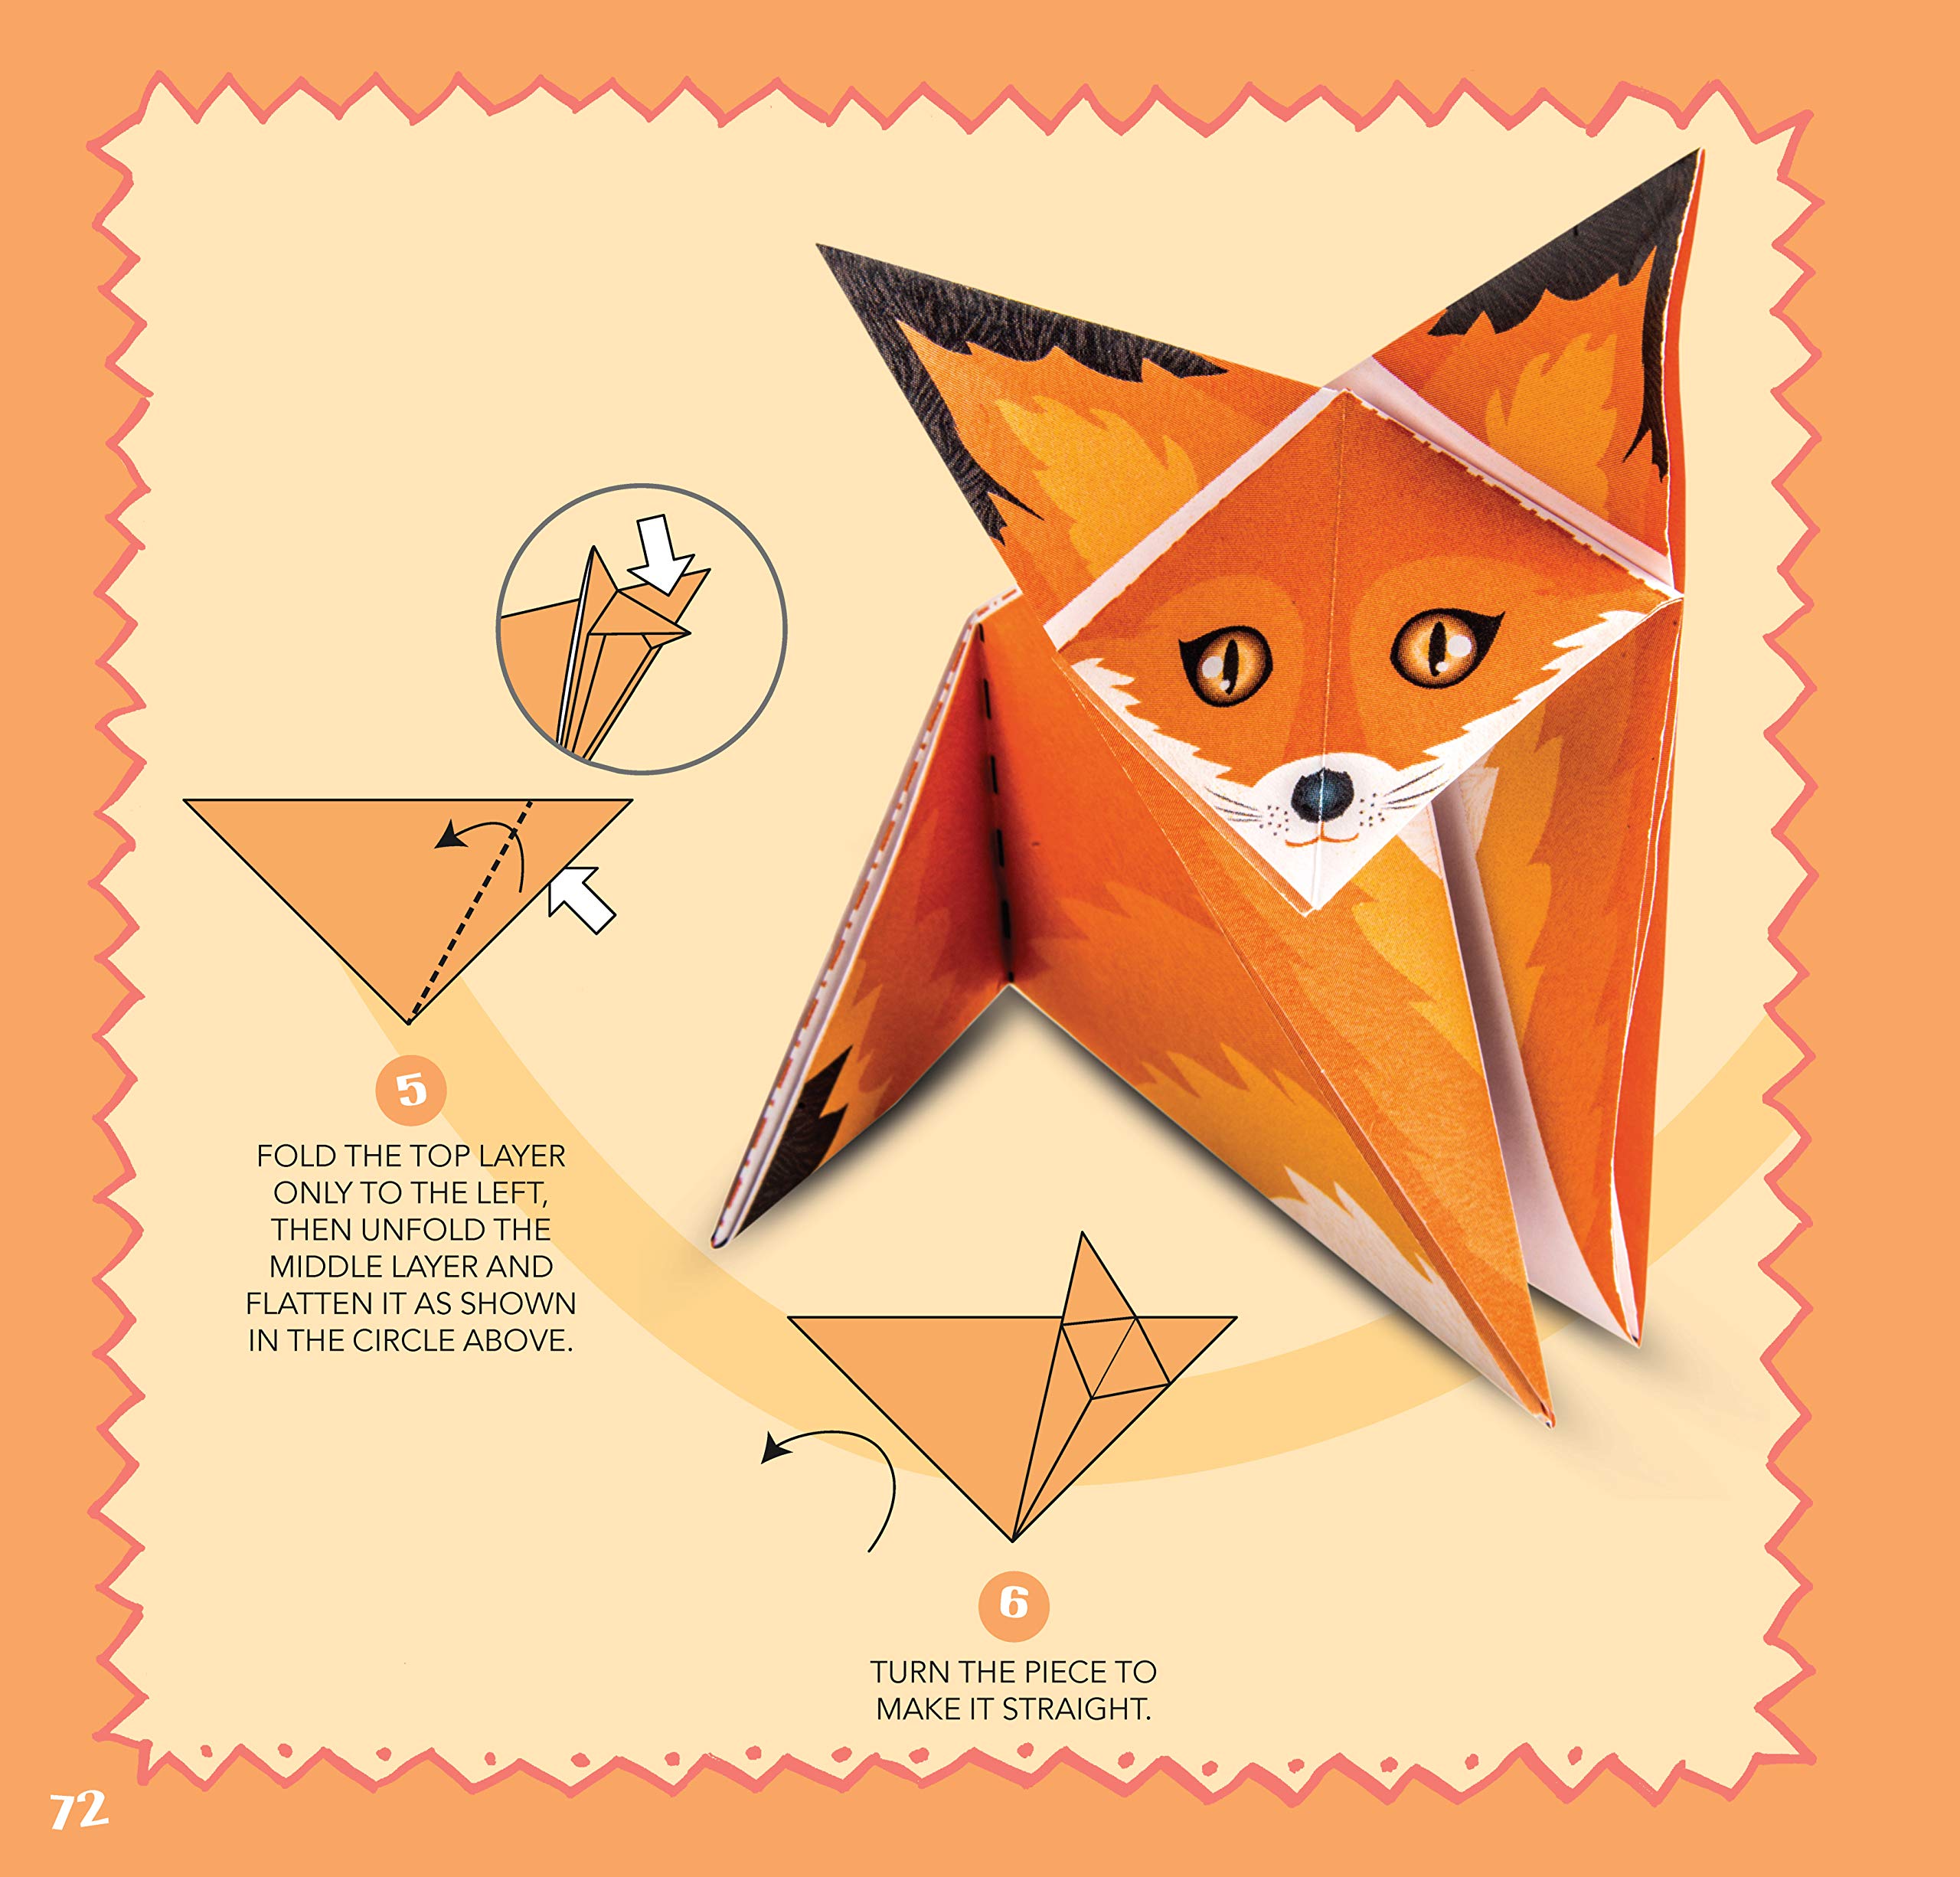 Origami for Kids: 20 Projects to Make Plus 100 Papers to Fold (Happy Fox Books) Fun and Creative Paperfolding Kit with Easy Fold Lines and Instructions for Bunnies, Crabs, Bugs, Dogs and More